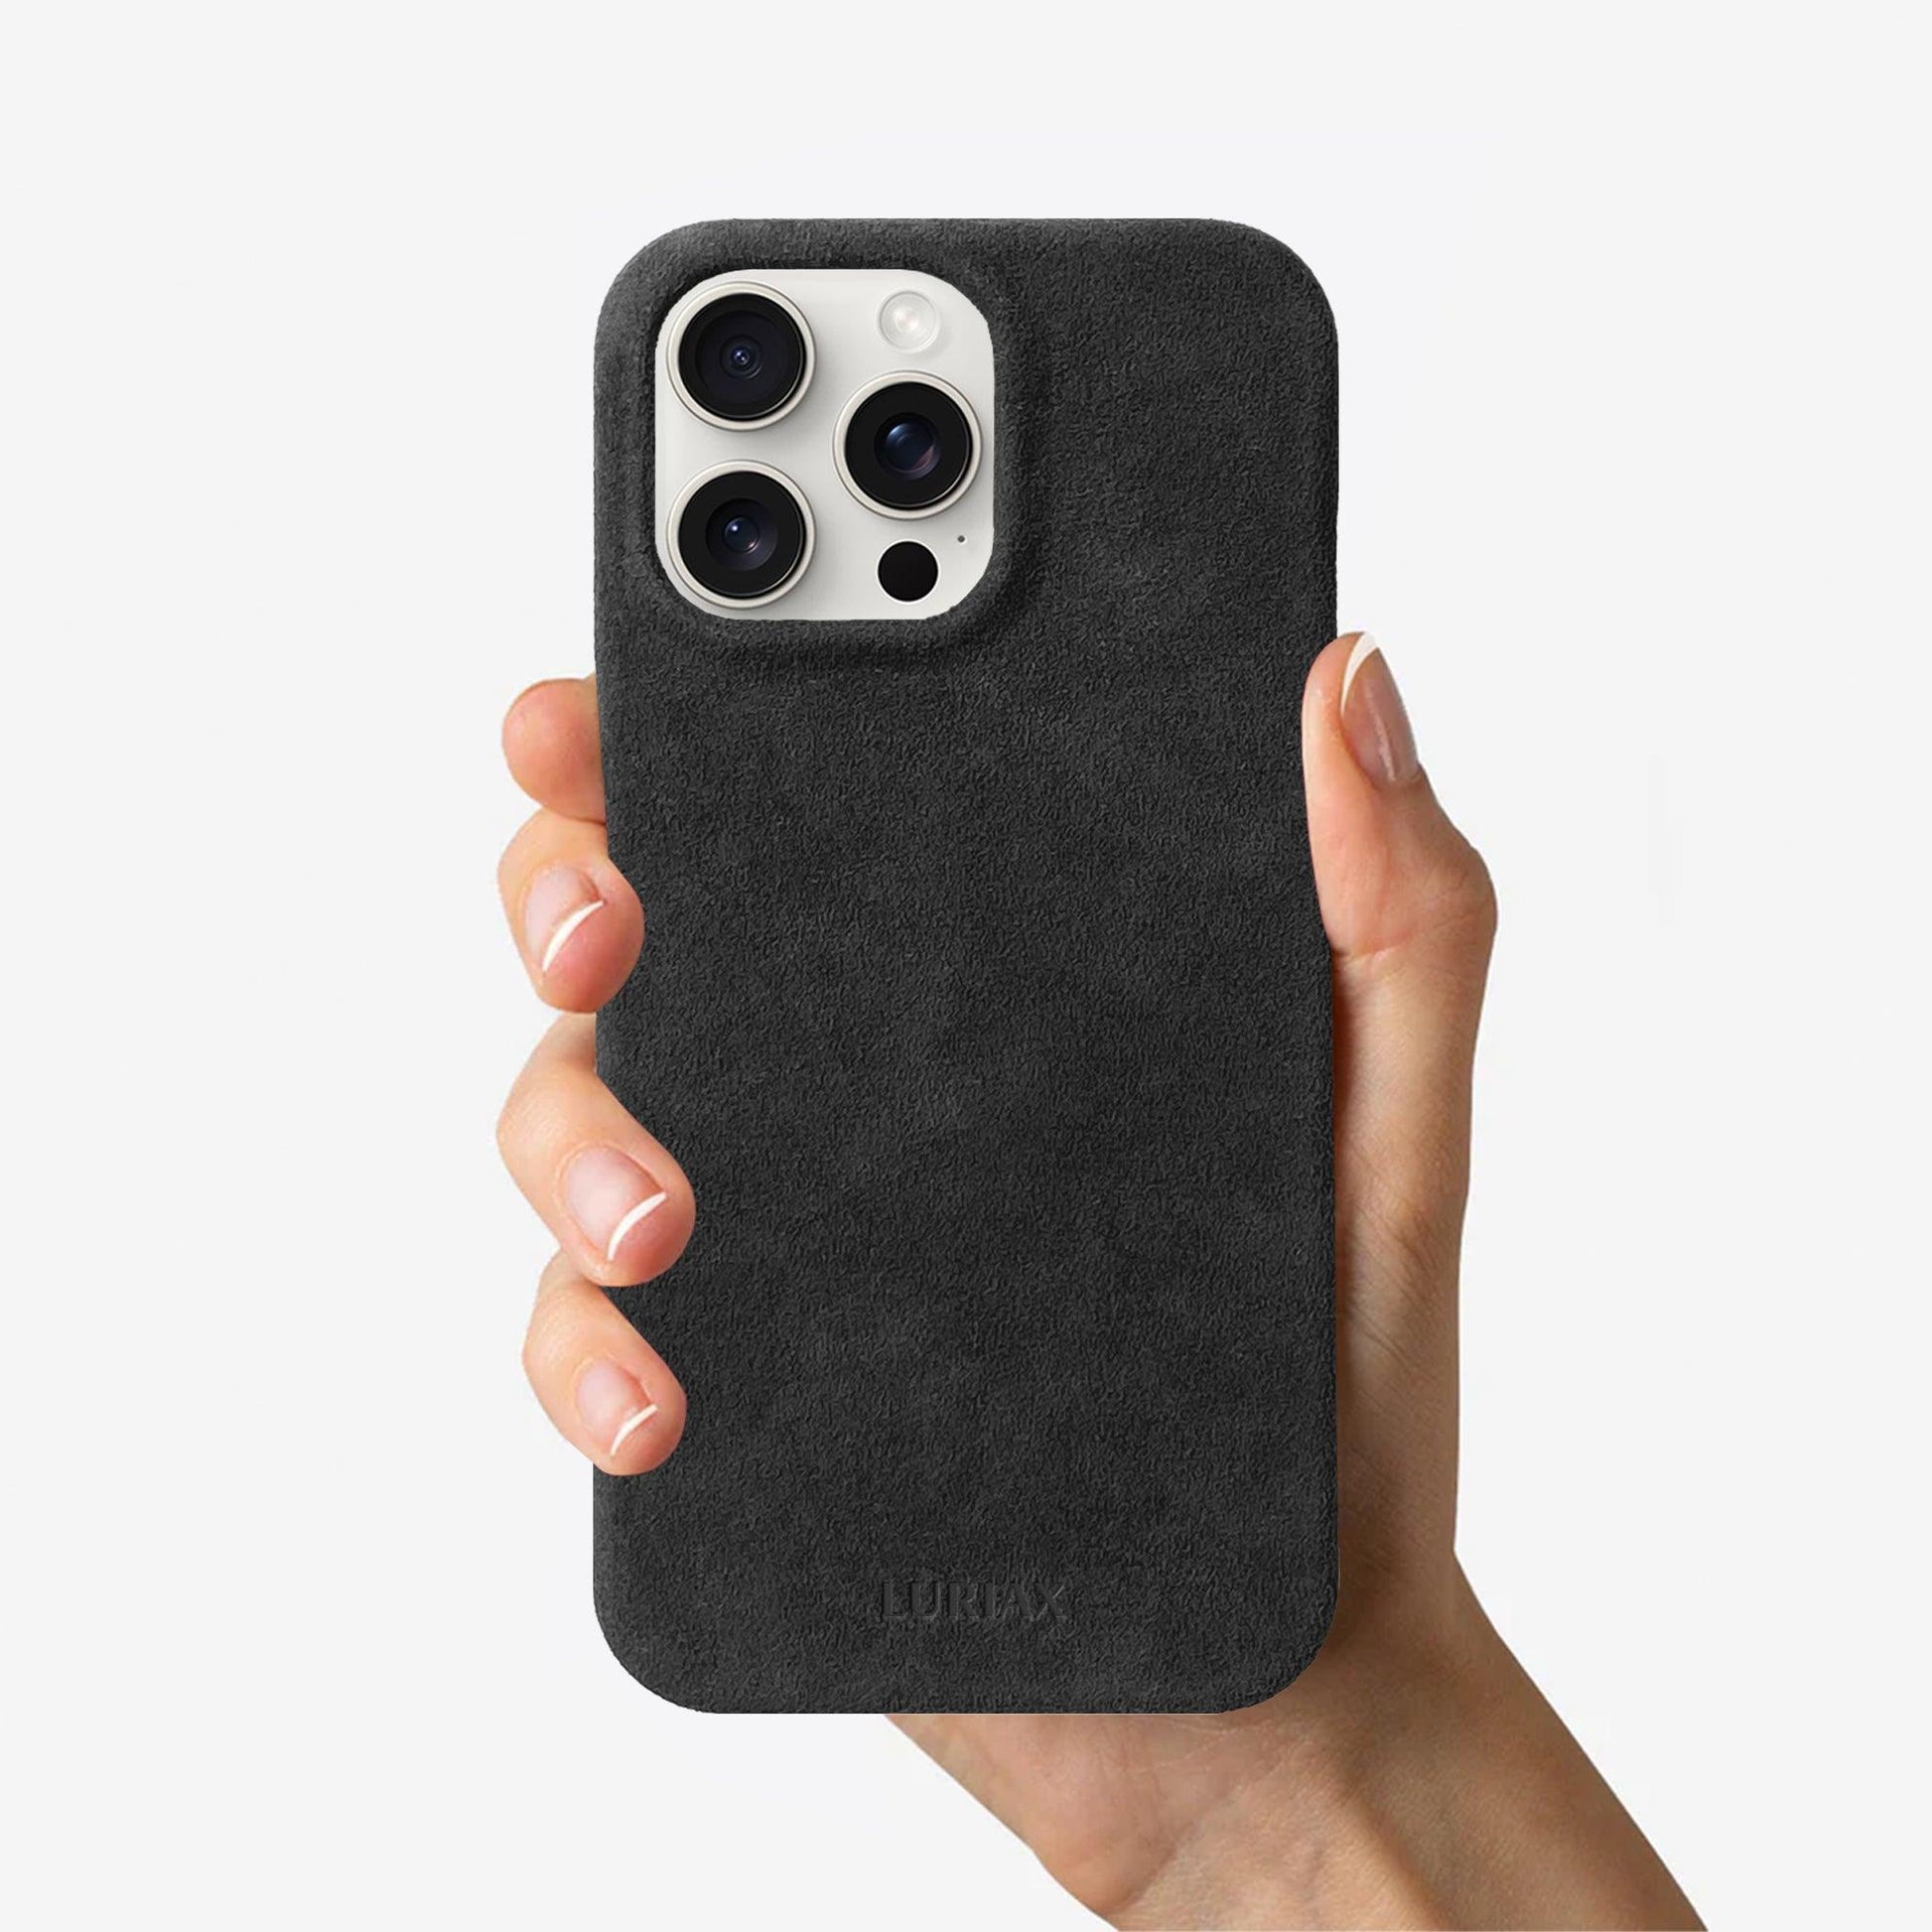 The Sport iPhone Case - Charcoal Black - Luriax Alcantara Suede Leather Fabric